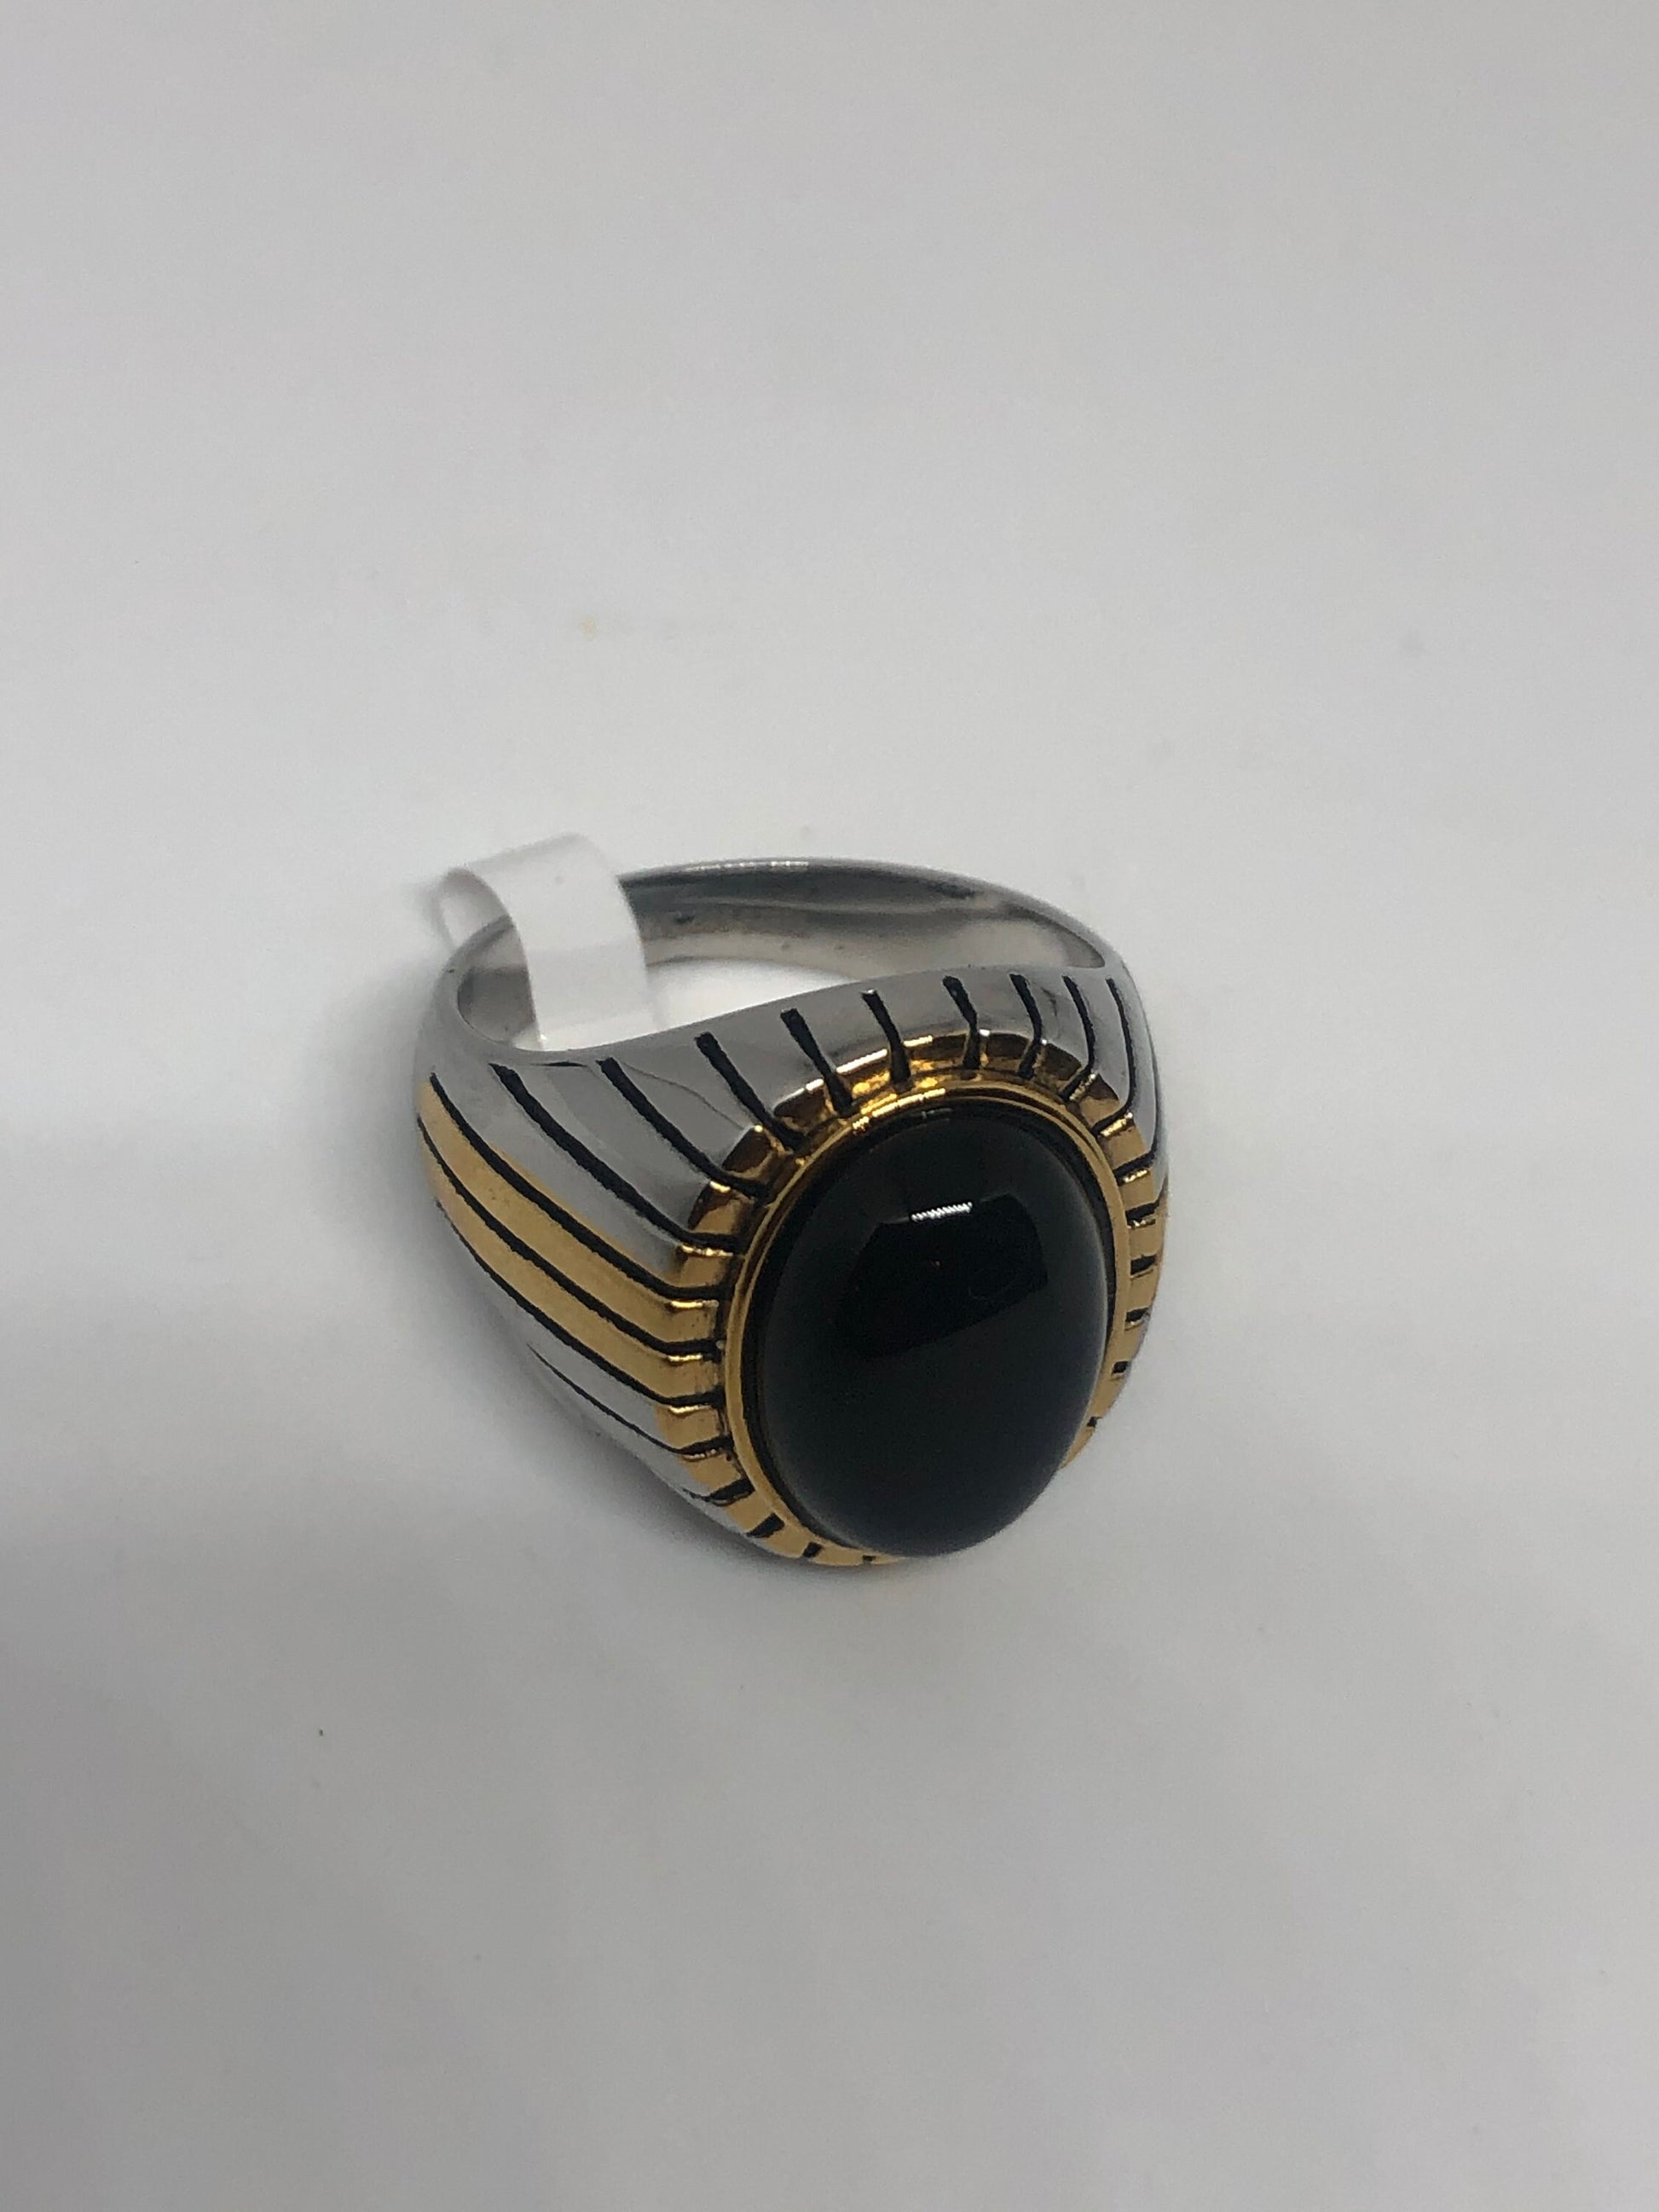 Vintage Gothic Black Onyx Gold Accent Stainless Steel Mens Ring